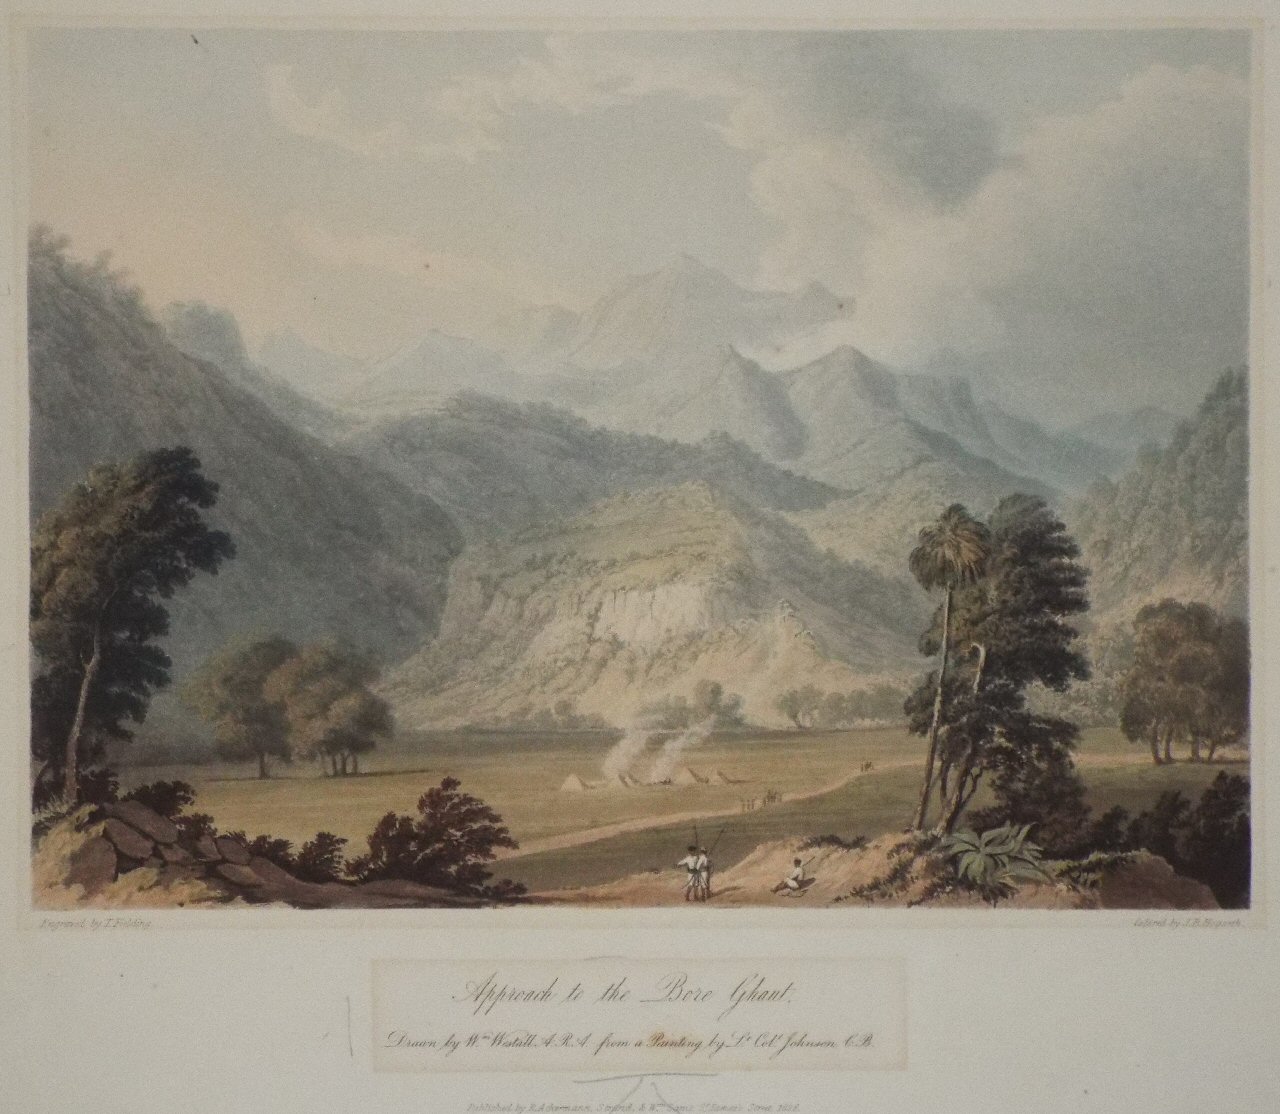 Aquatint - Approach to the Bore Ghaut. Drawn by Wm. Westall A.R.A. from a Painting by Lt. Coll. Johnson C.B. - Fielding